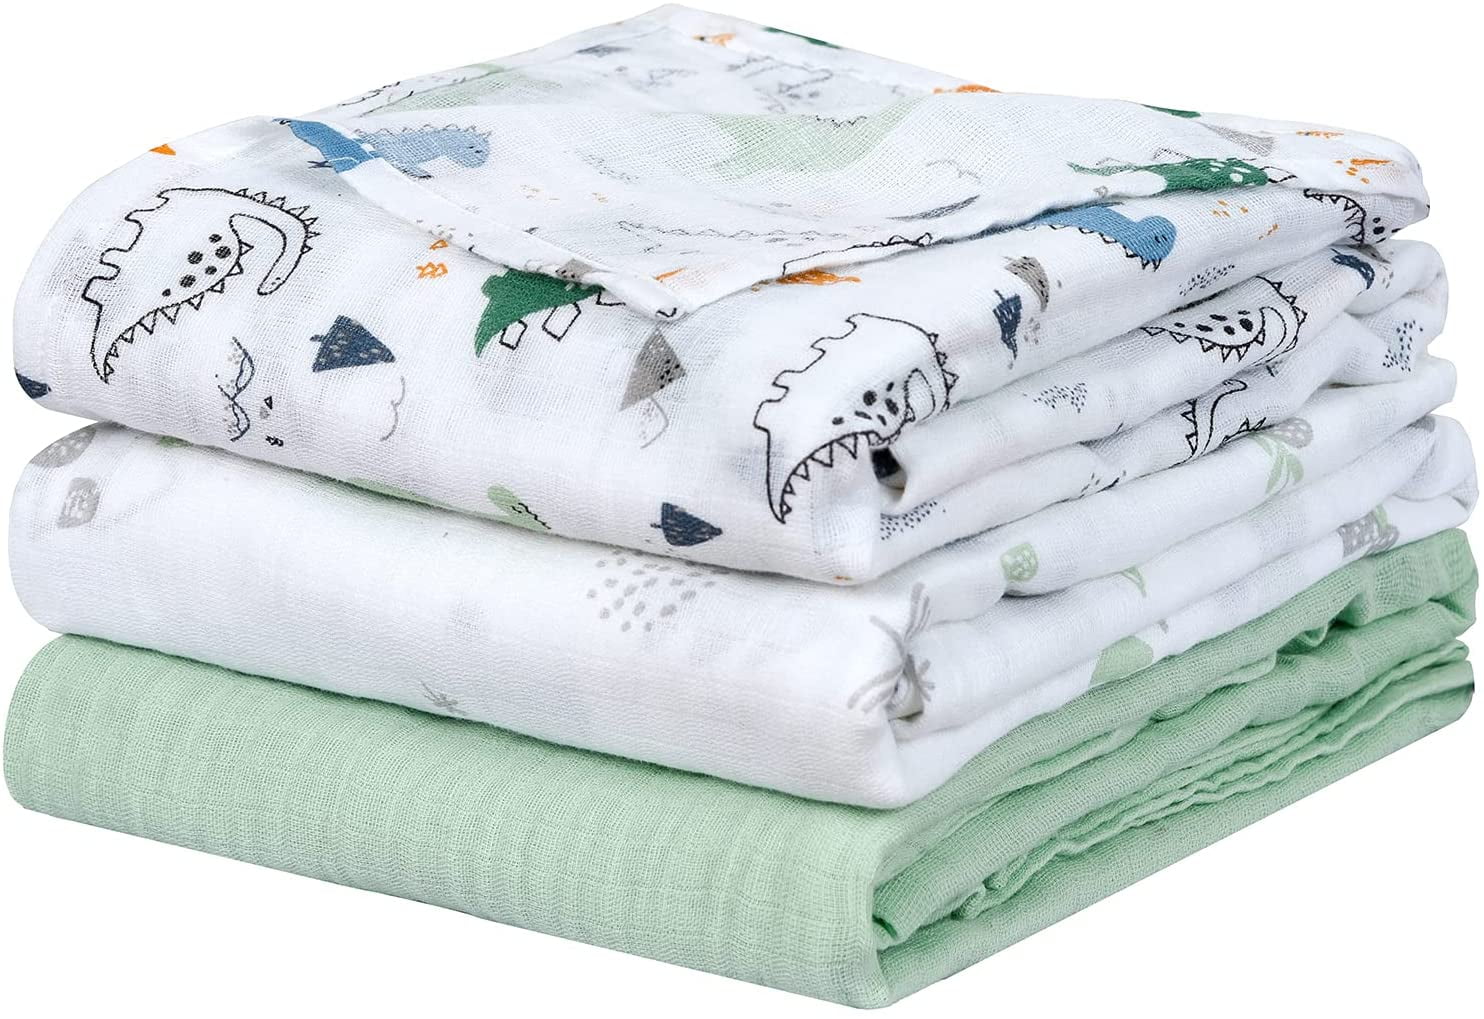 70x90cm Ideal for Boys & Girls | Soft & Breathable Material Gender Neutral Multipack of Three Machine Washable 100% Cotton Cellular Baby Blankets